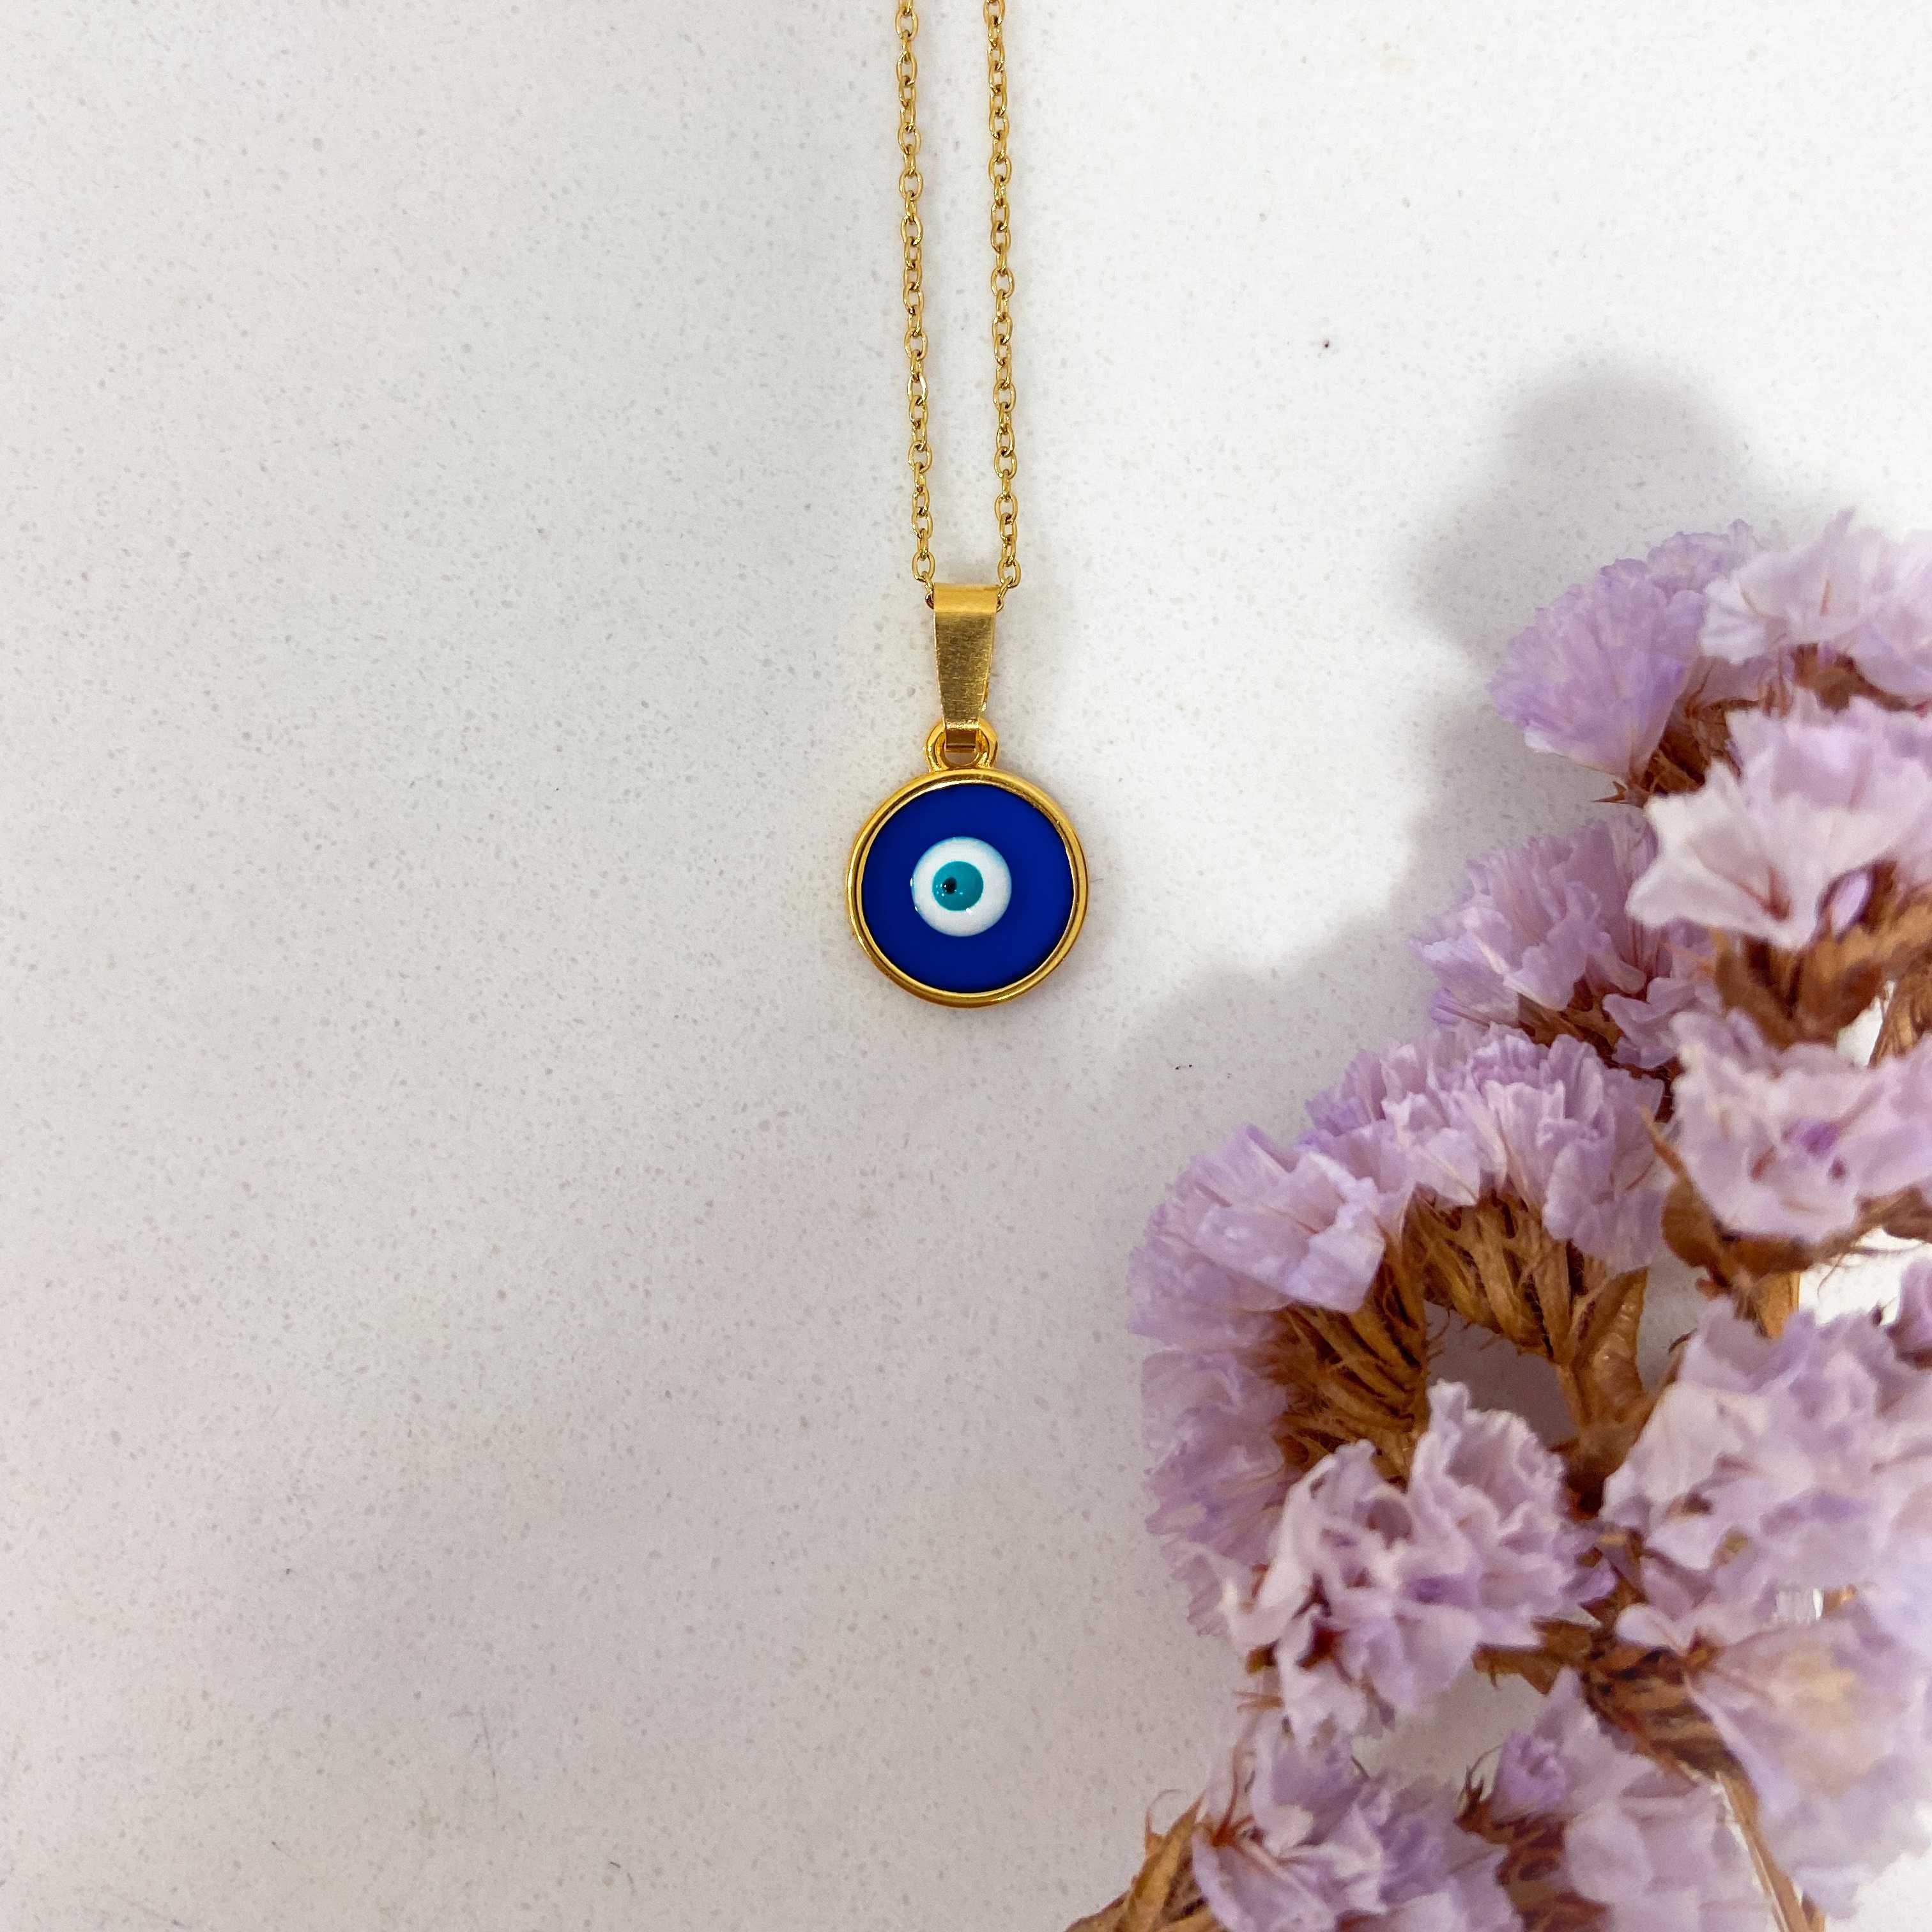 LUCKY CHARM NECKLACE - GOLD & BLUE